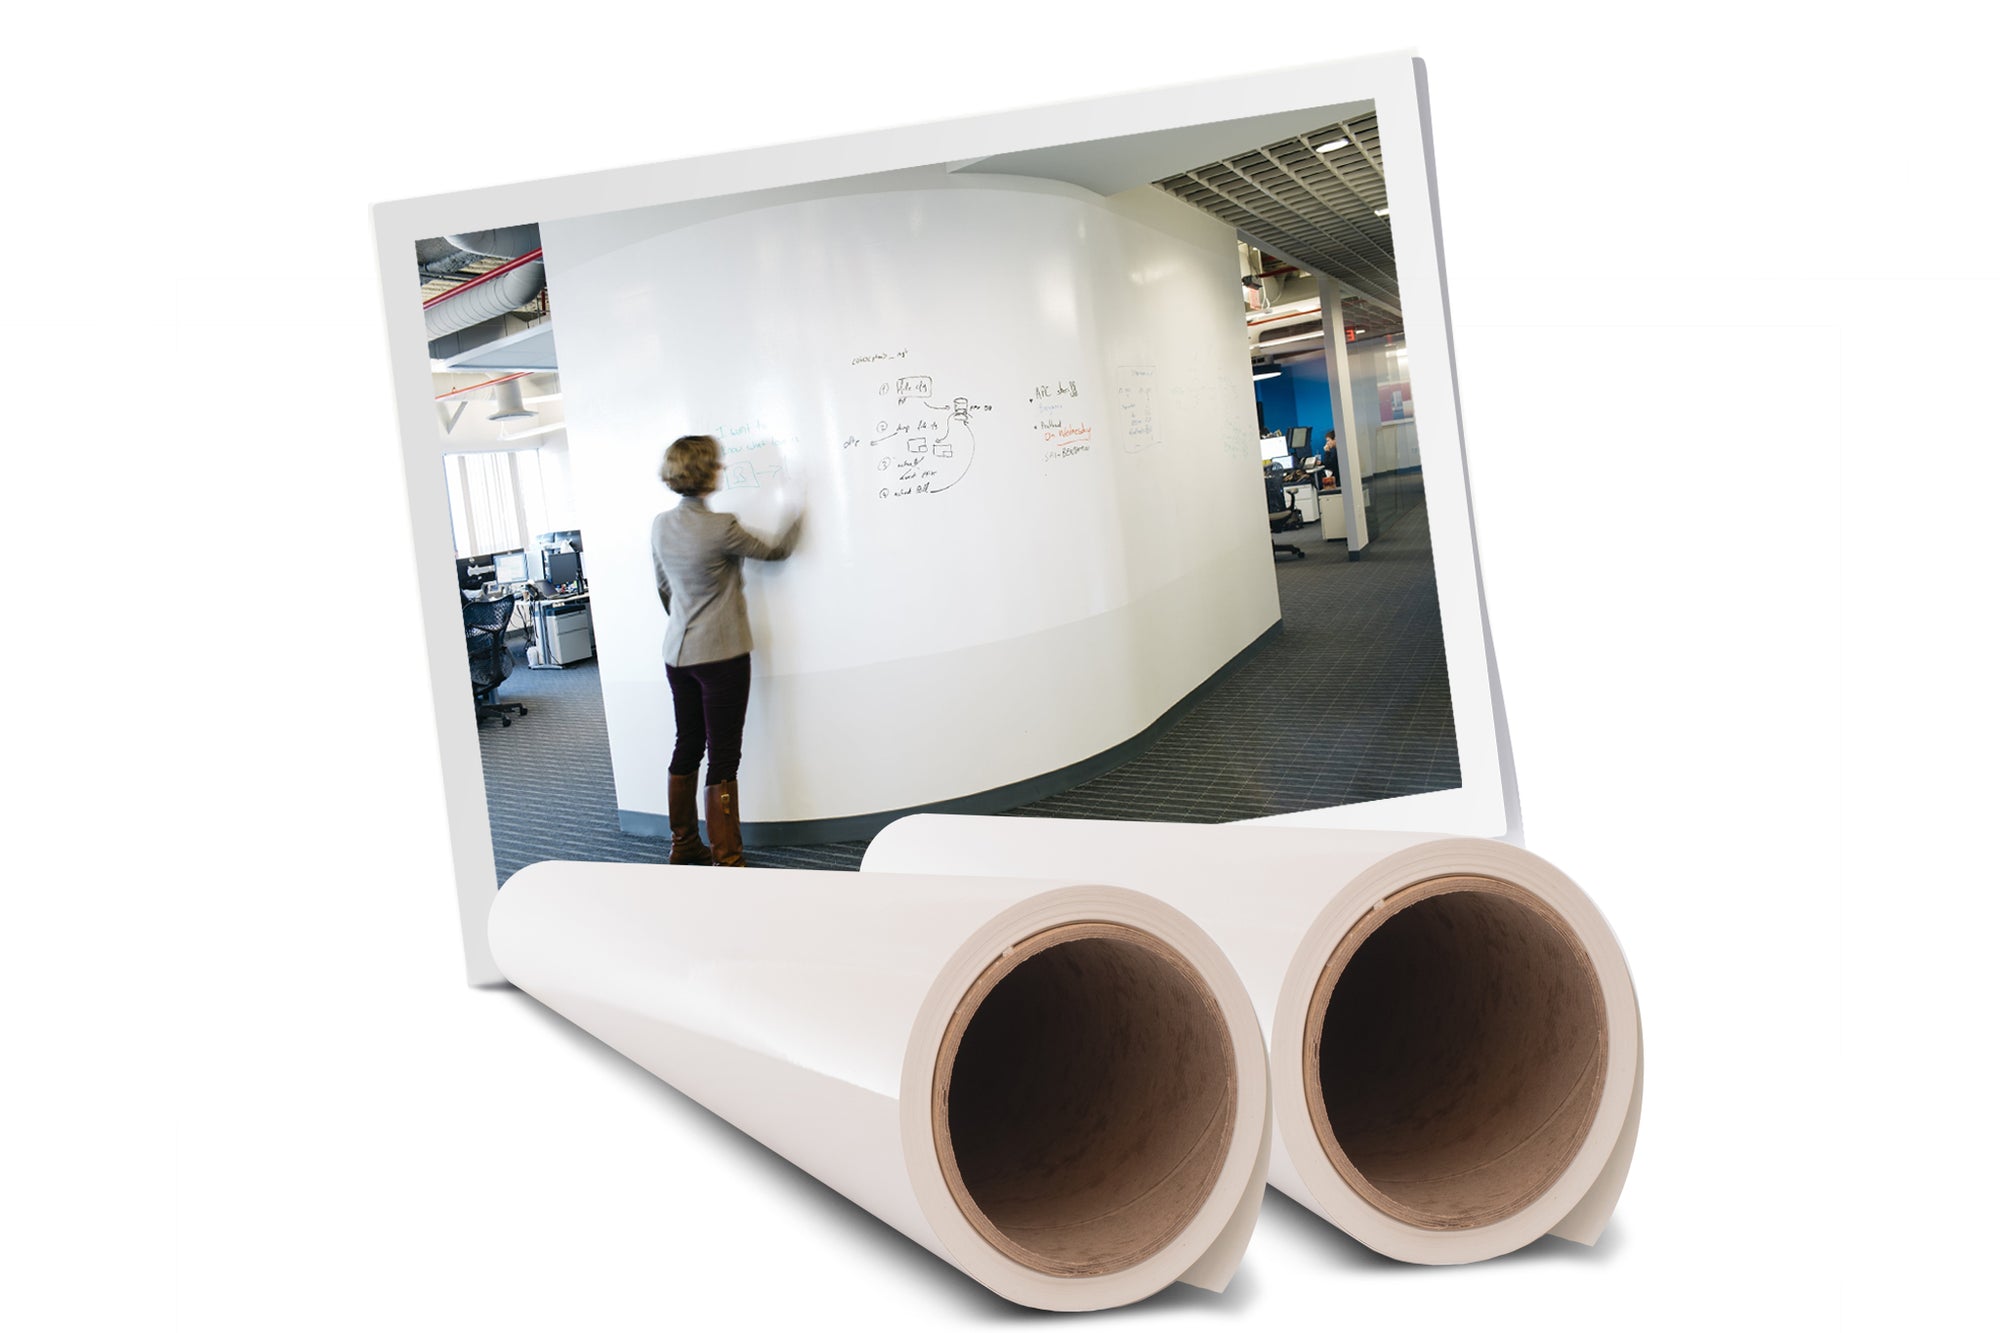 IdeaPaint Covers New Ground with Dry-Erase Paint